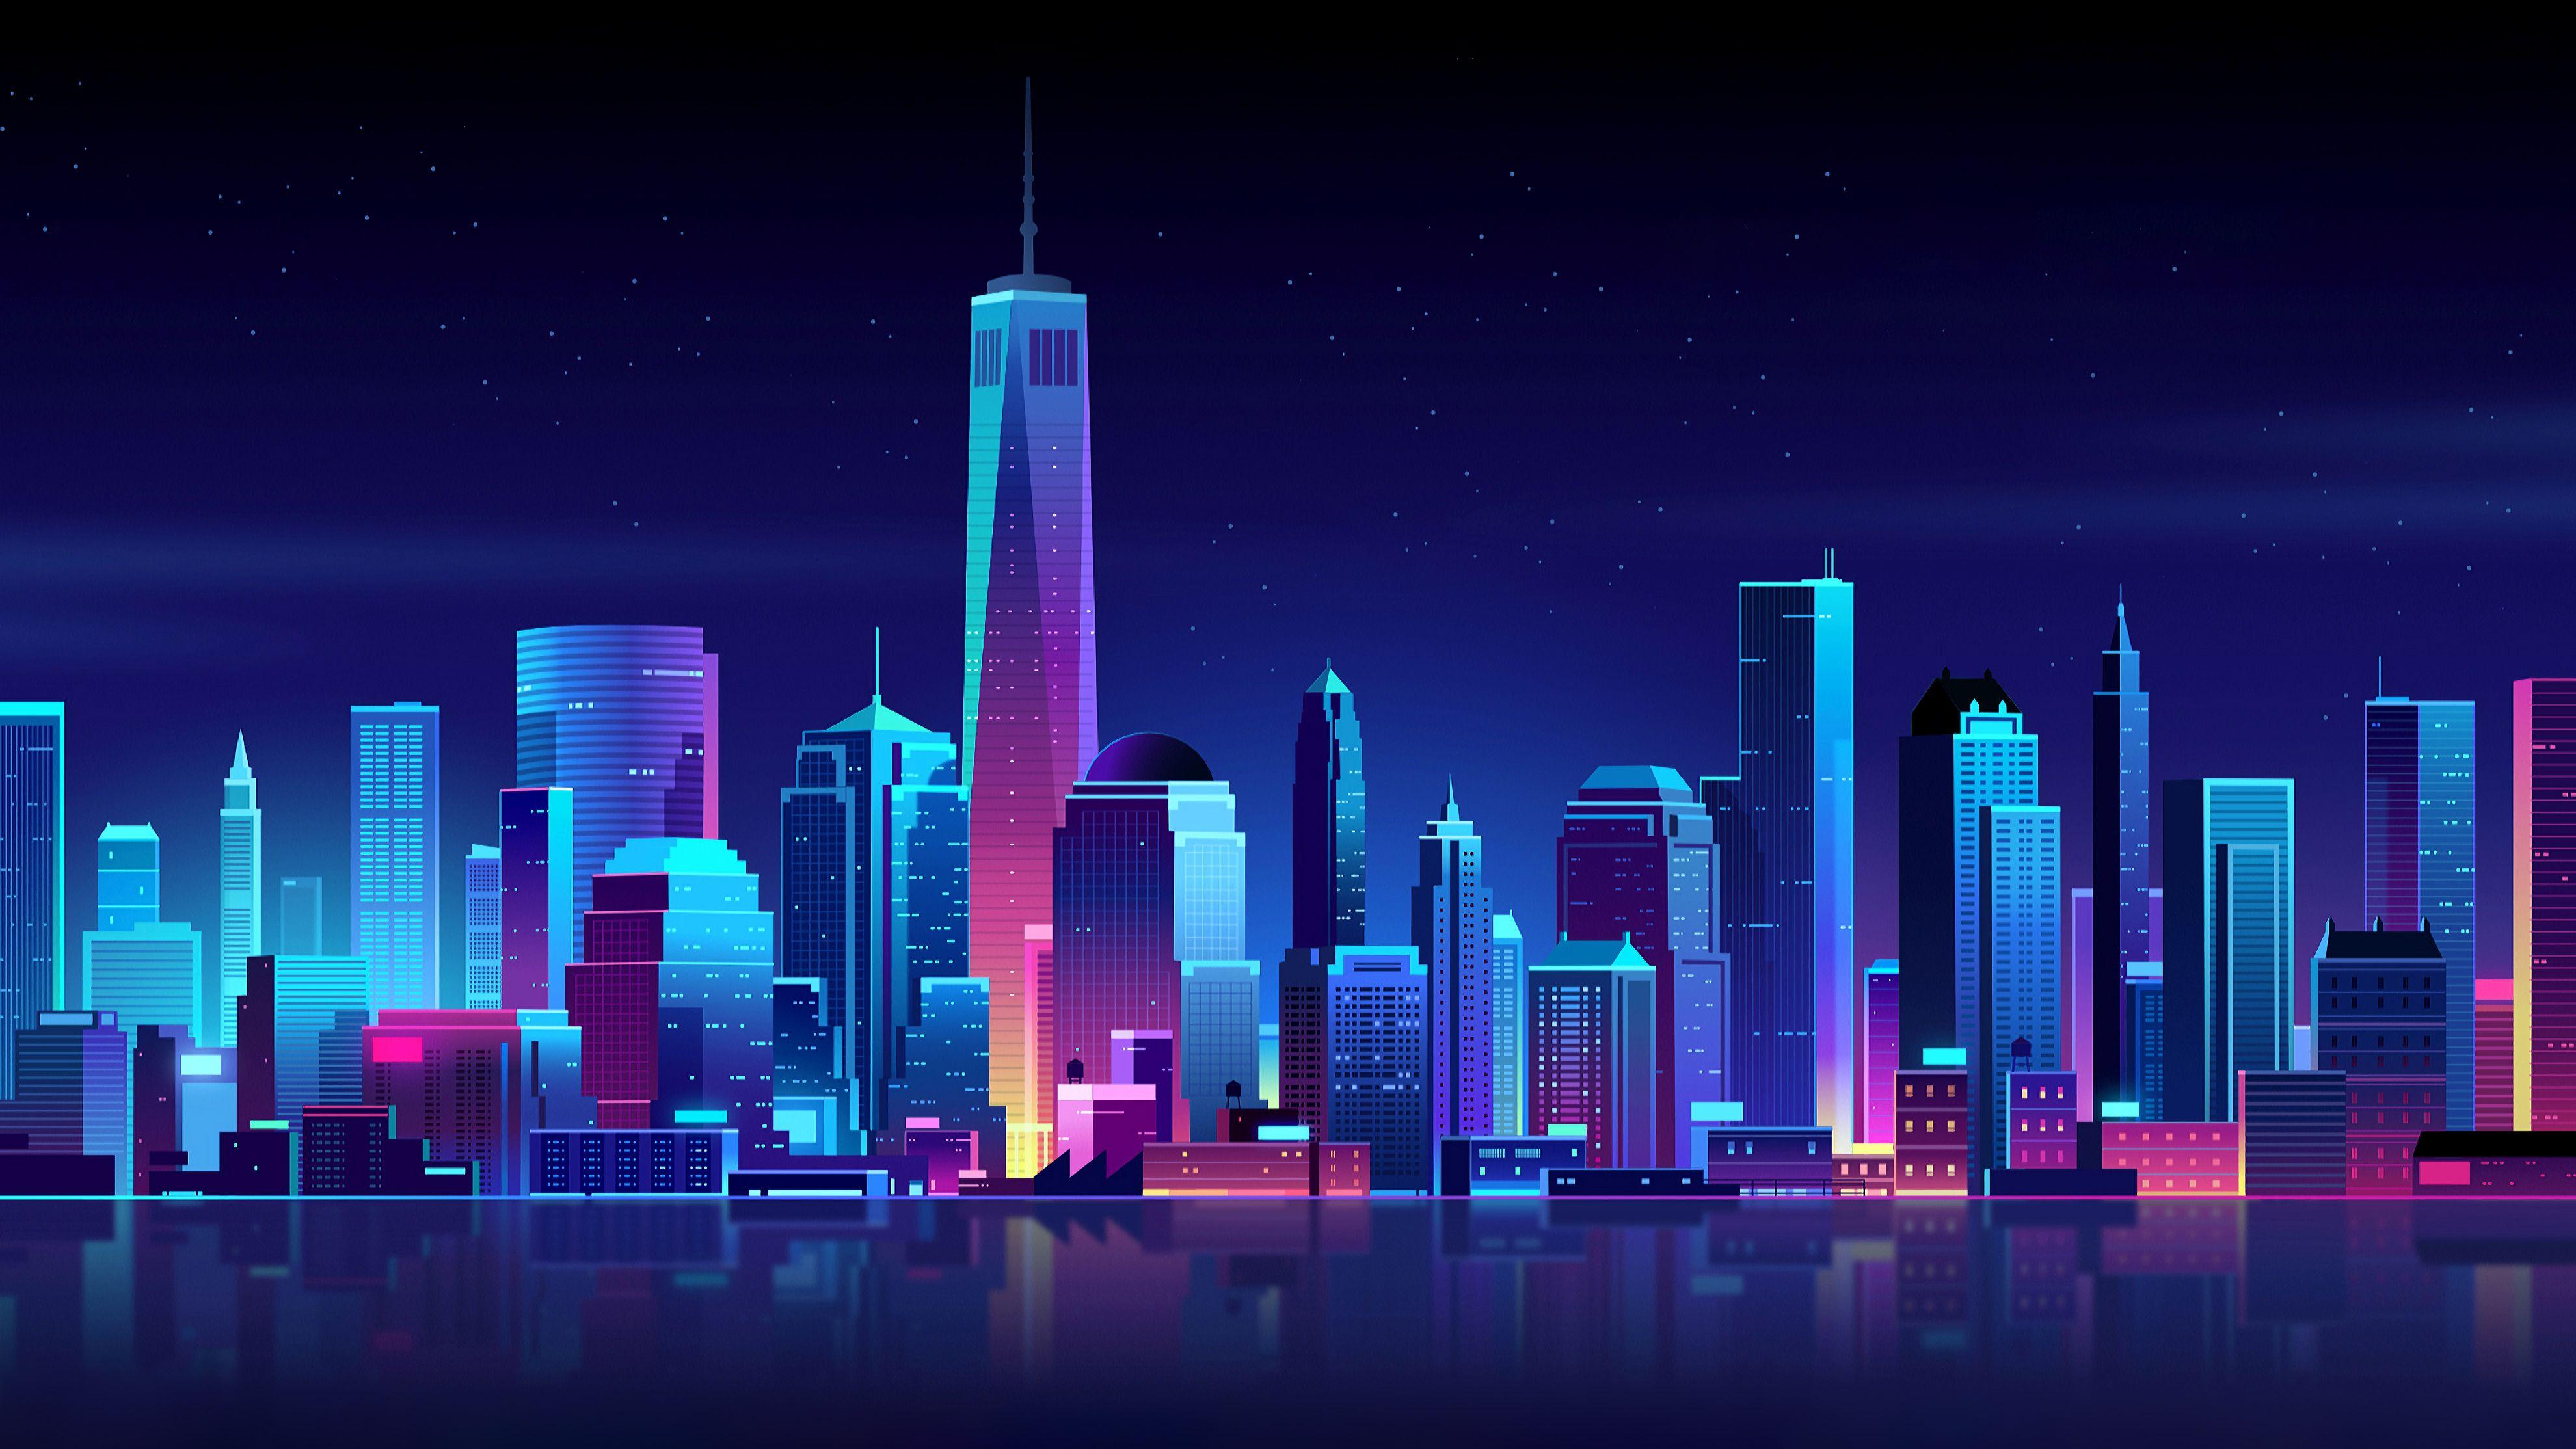 Purple And Blue Retro City Wallpapers - Wallpaper Cave